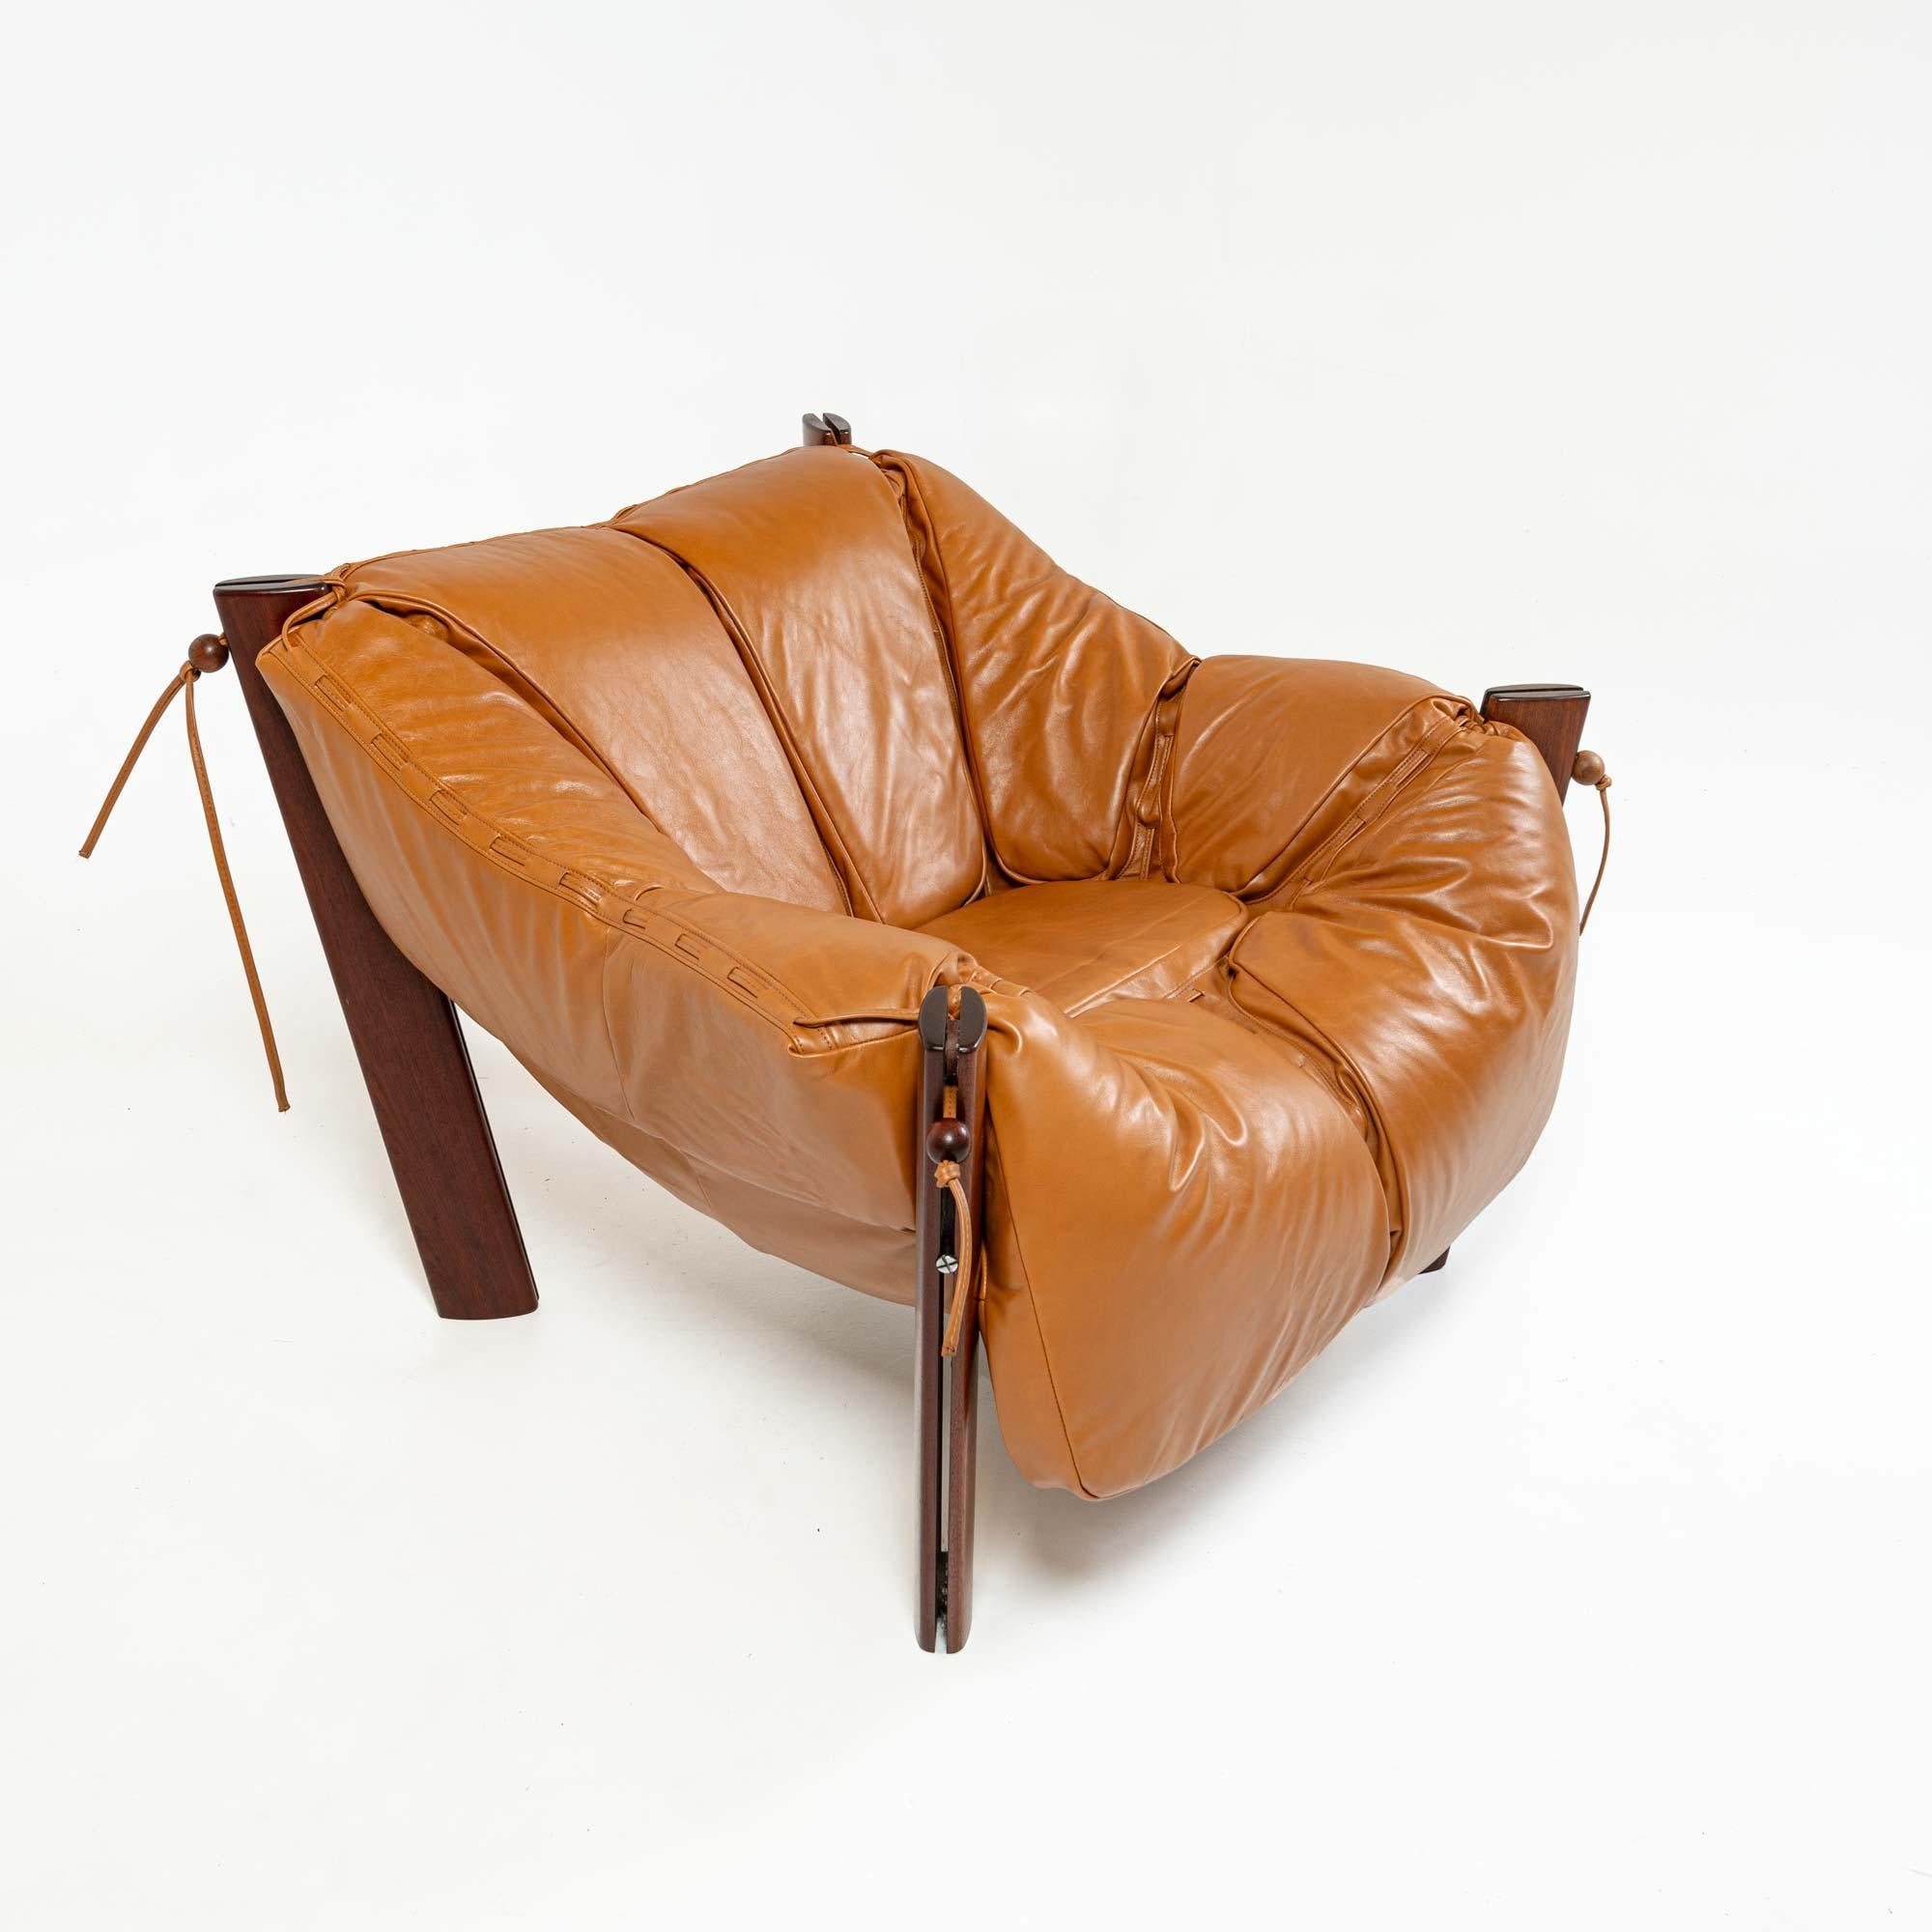 Brazilian Percival Lafer MP-211 lounge chair in rosewood and Maharam Sorghum leather